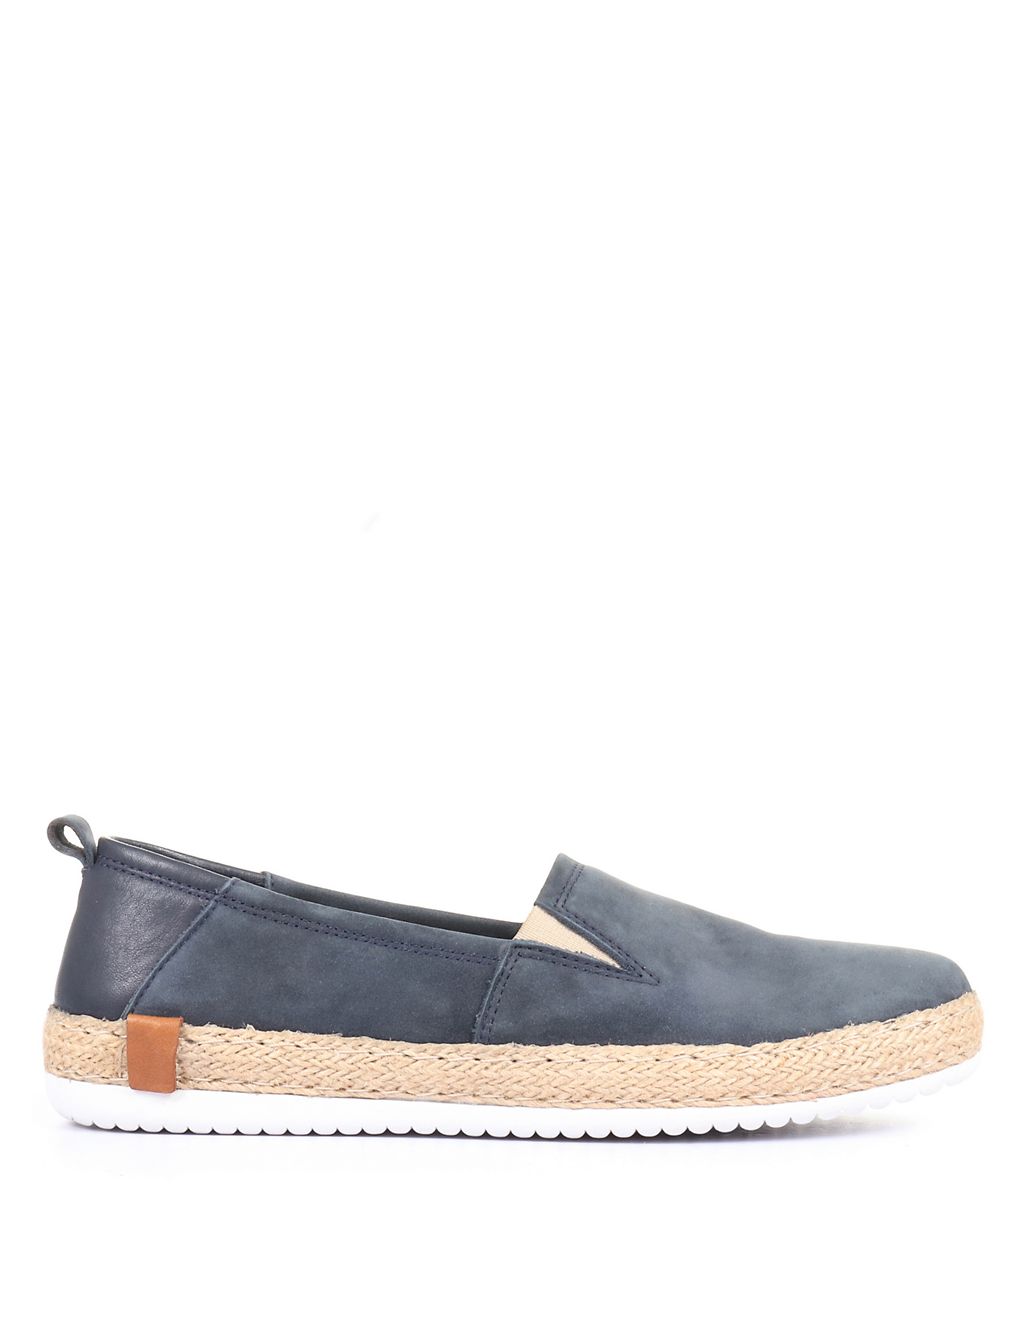 Leather Suede Flat Espadrilles 3 of 5